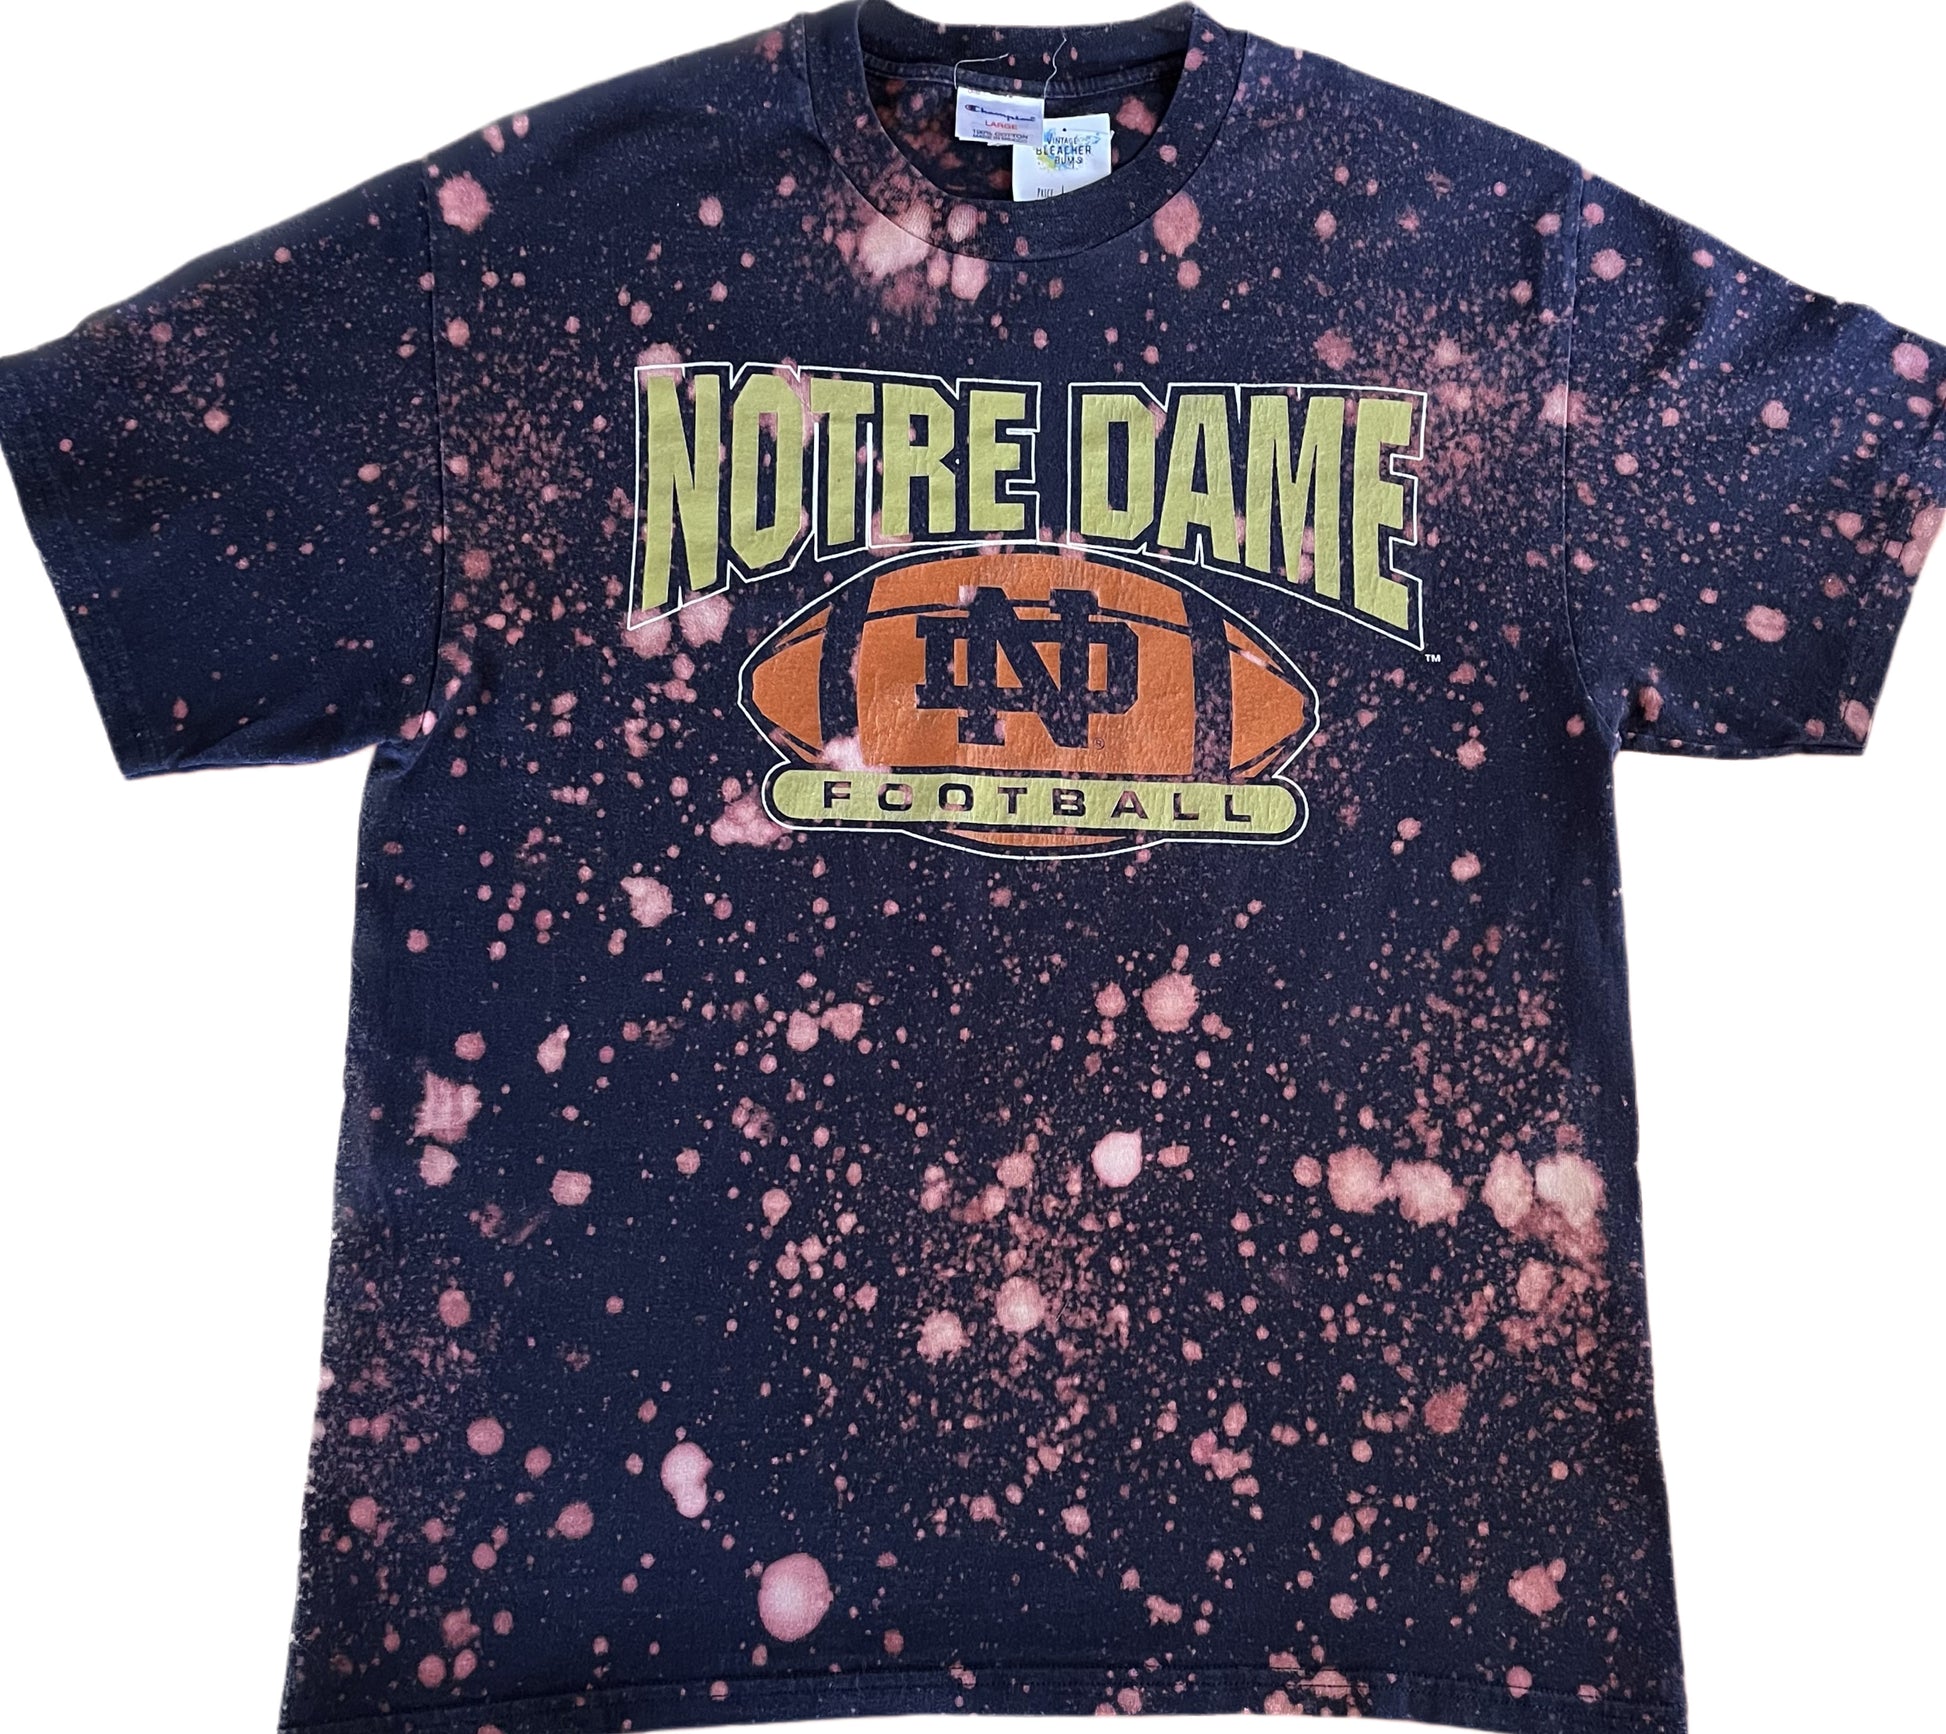 vintage university of notre dame football champion tee shirt college for men and women